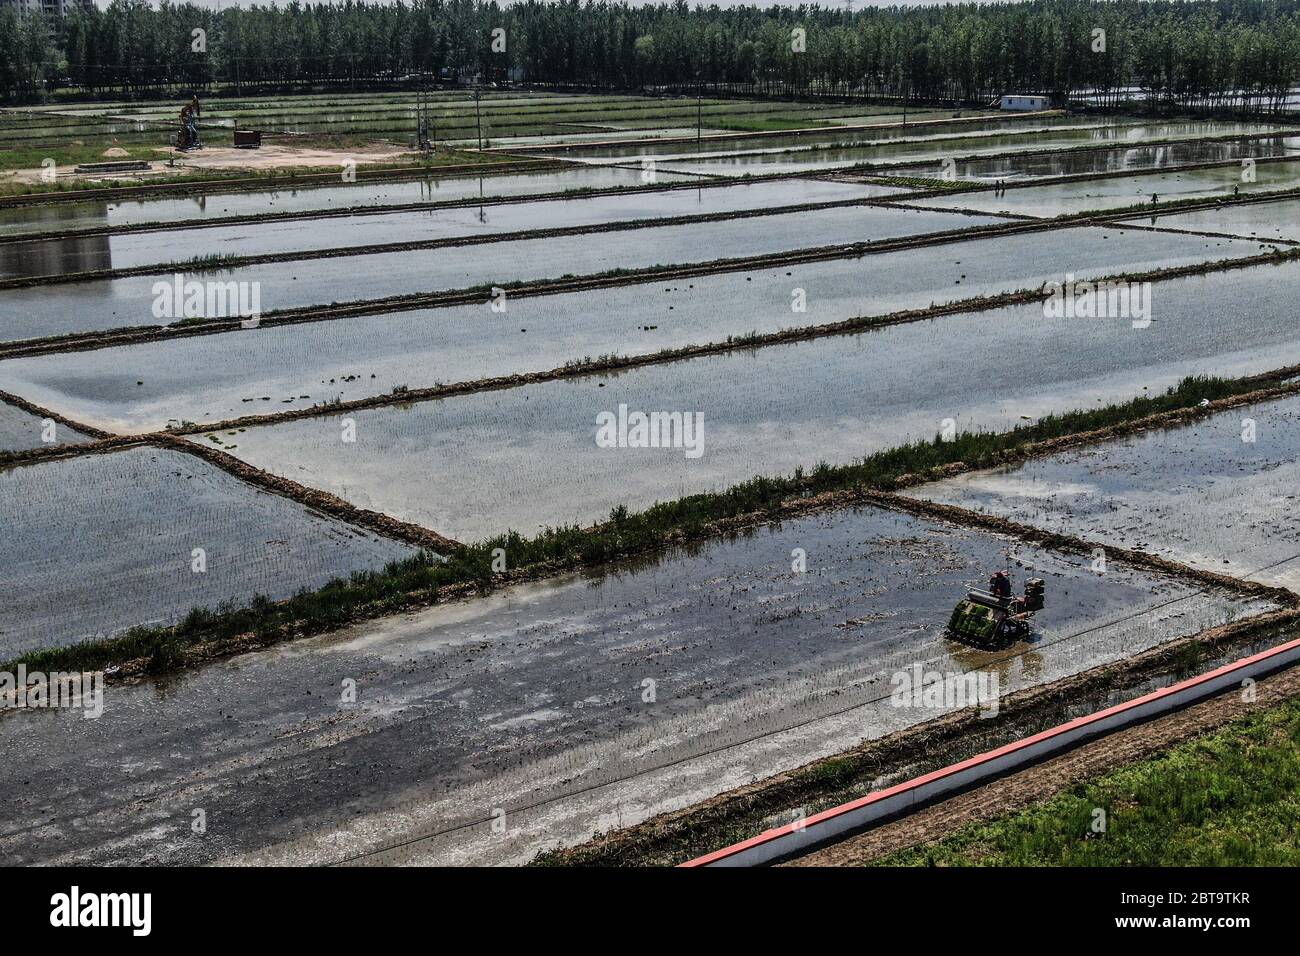 Panjin, China's Liaoning Province. 24th May, 2020. A transplanter works to plant rice seedlings in Dawa District in Panjin City, northeast China's Liaoning Province, May 24, 2020. Rice transplanting of over 1.59 million mu (about 106,000 hectares) paddy fields in Panjin, the main rice producing area in Liaoning, has started recently. Credit: Pan Yulong/Xinhua/Alamy Live News Stock Photo